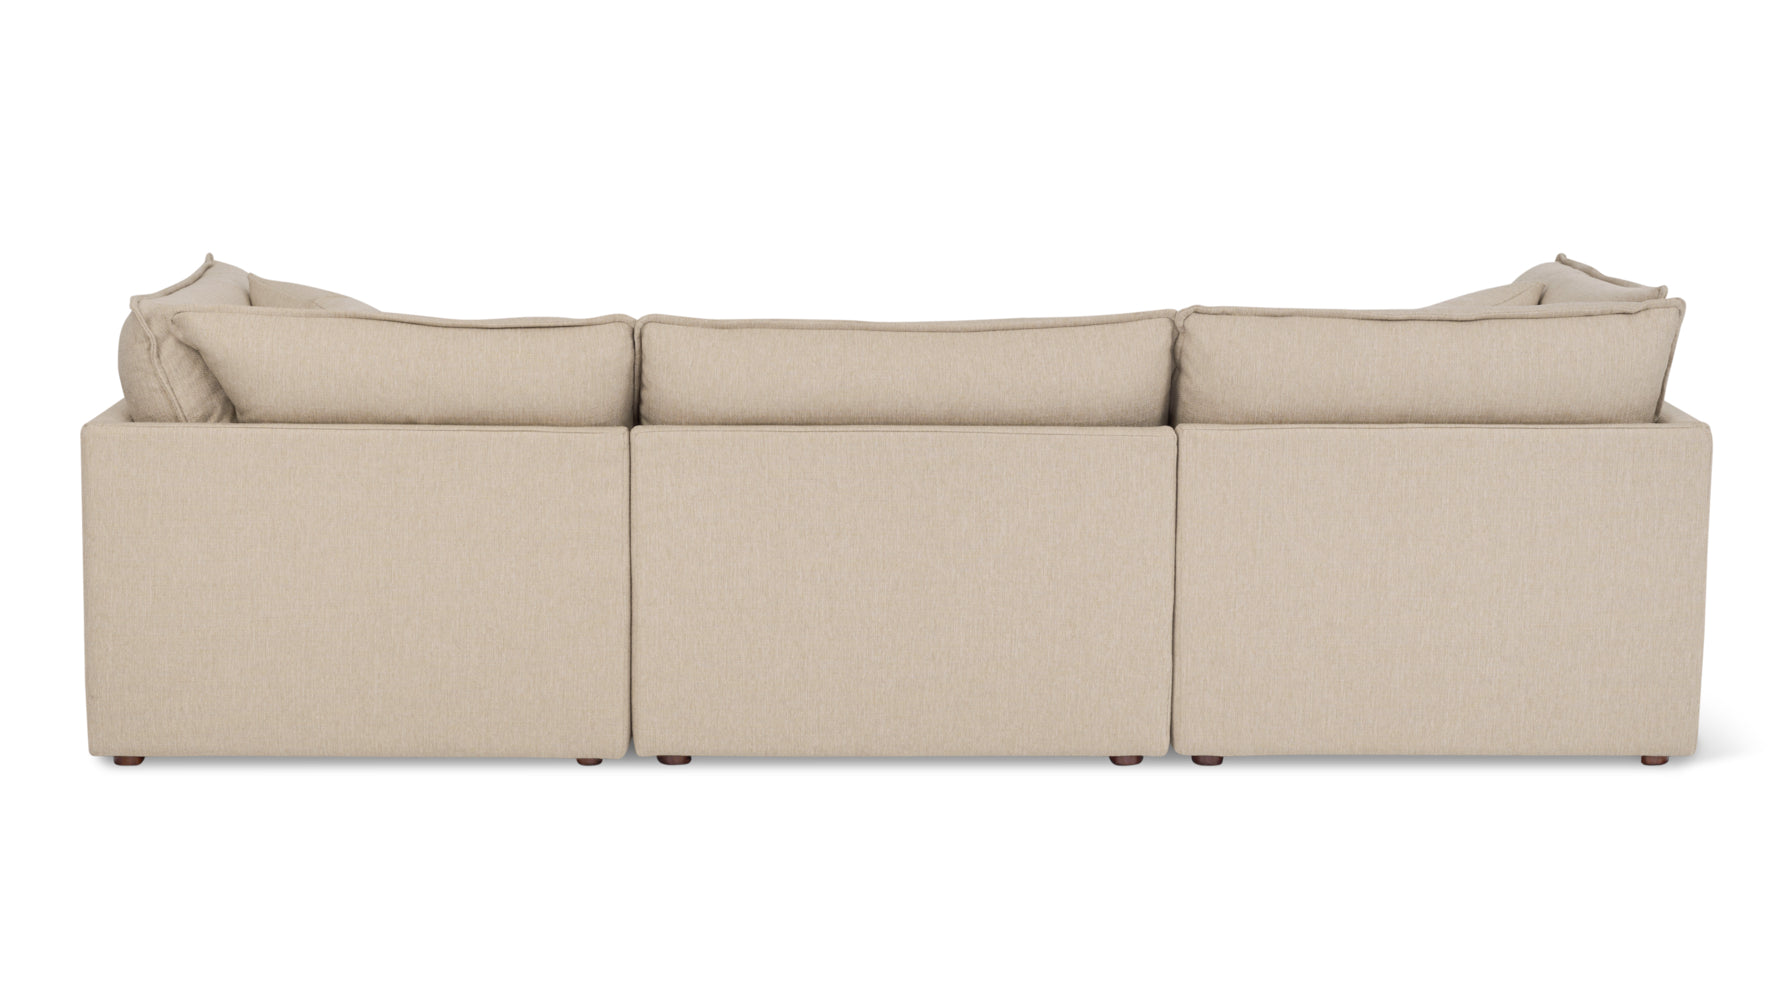 Chill Time 4-Piece Modular Sectional, Biscuit - Image 4